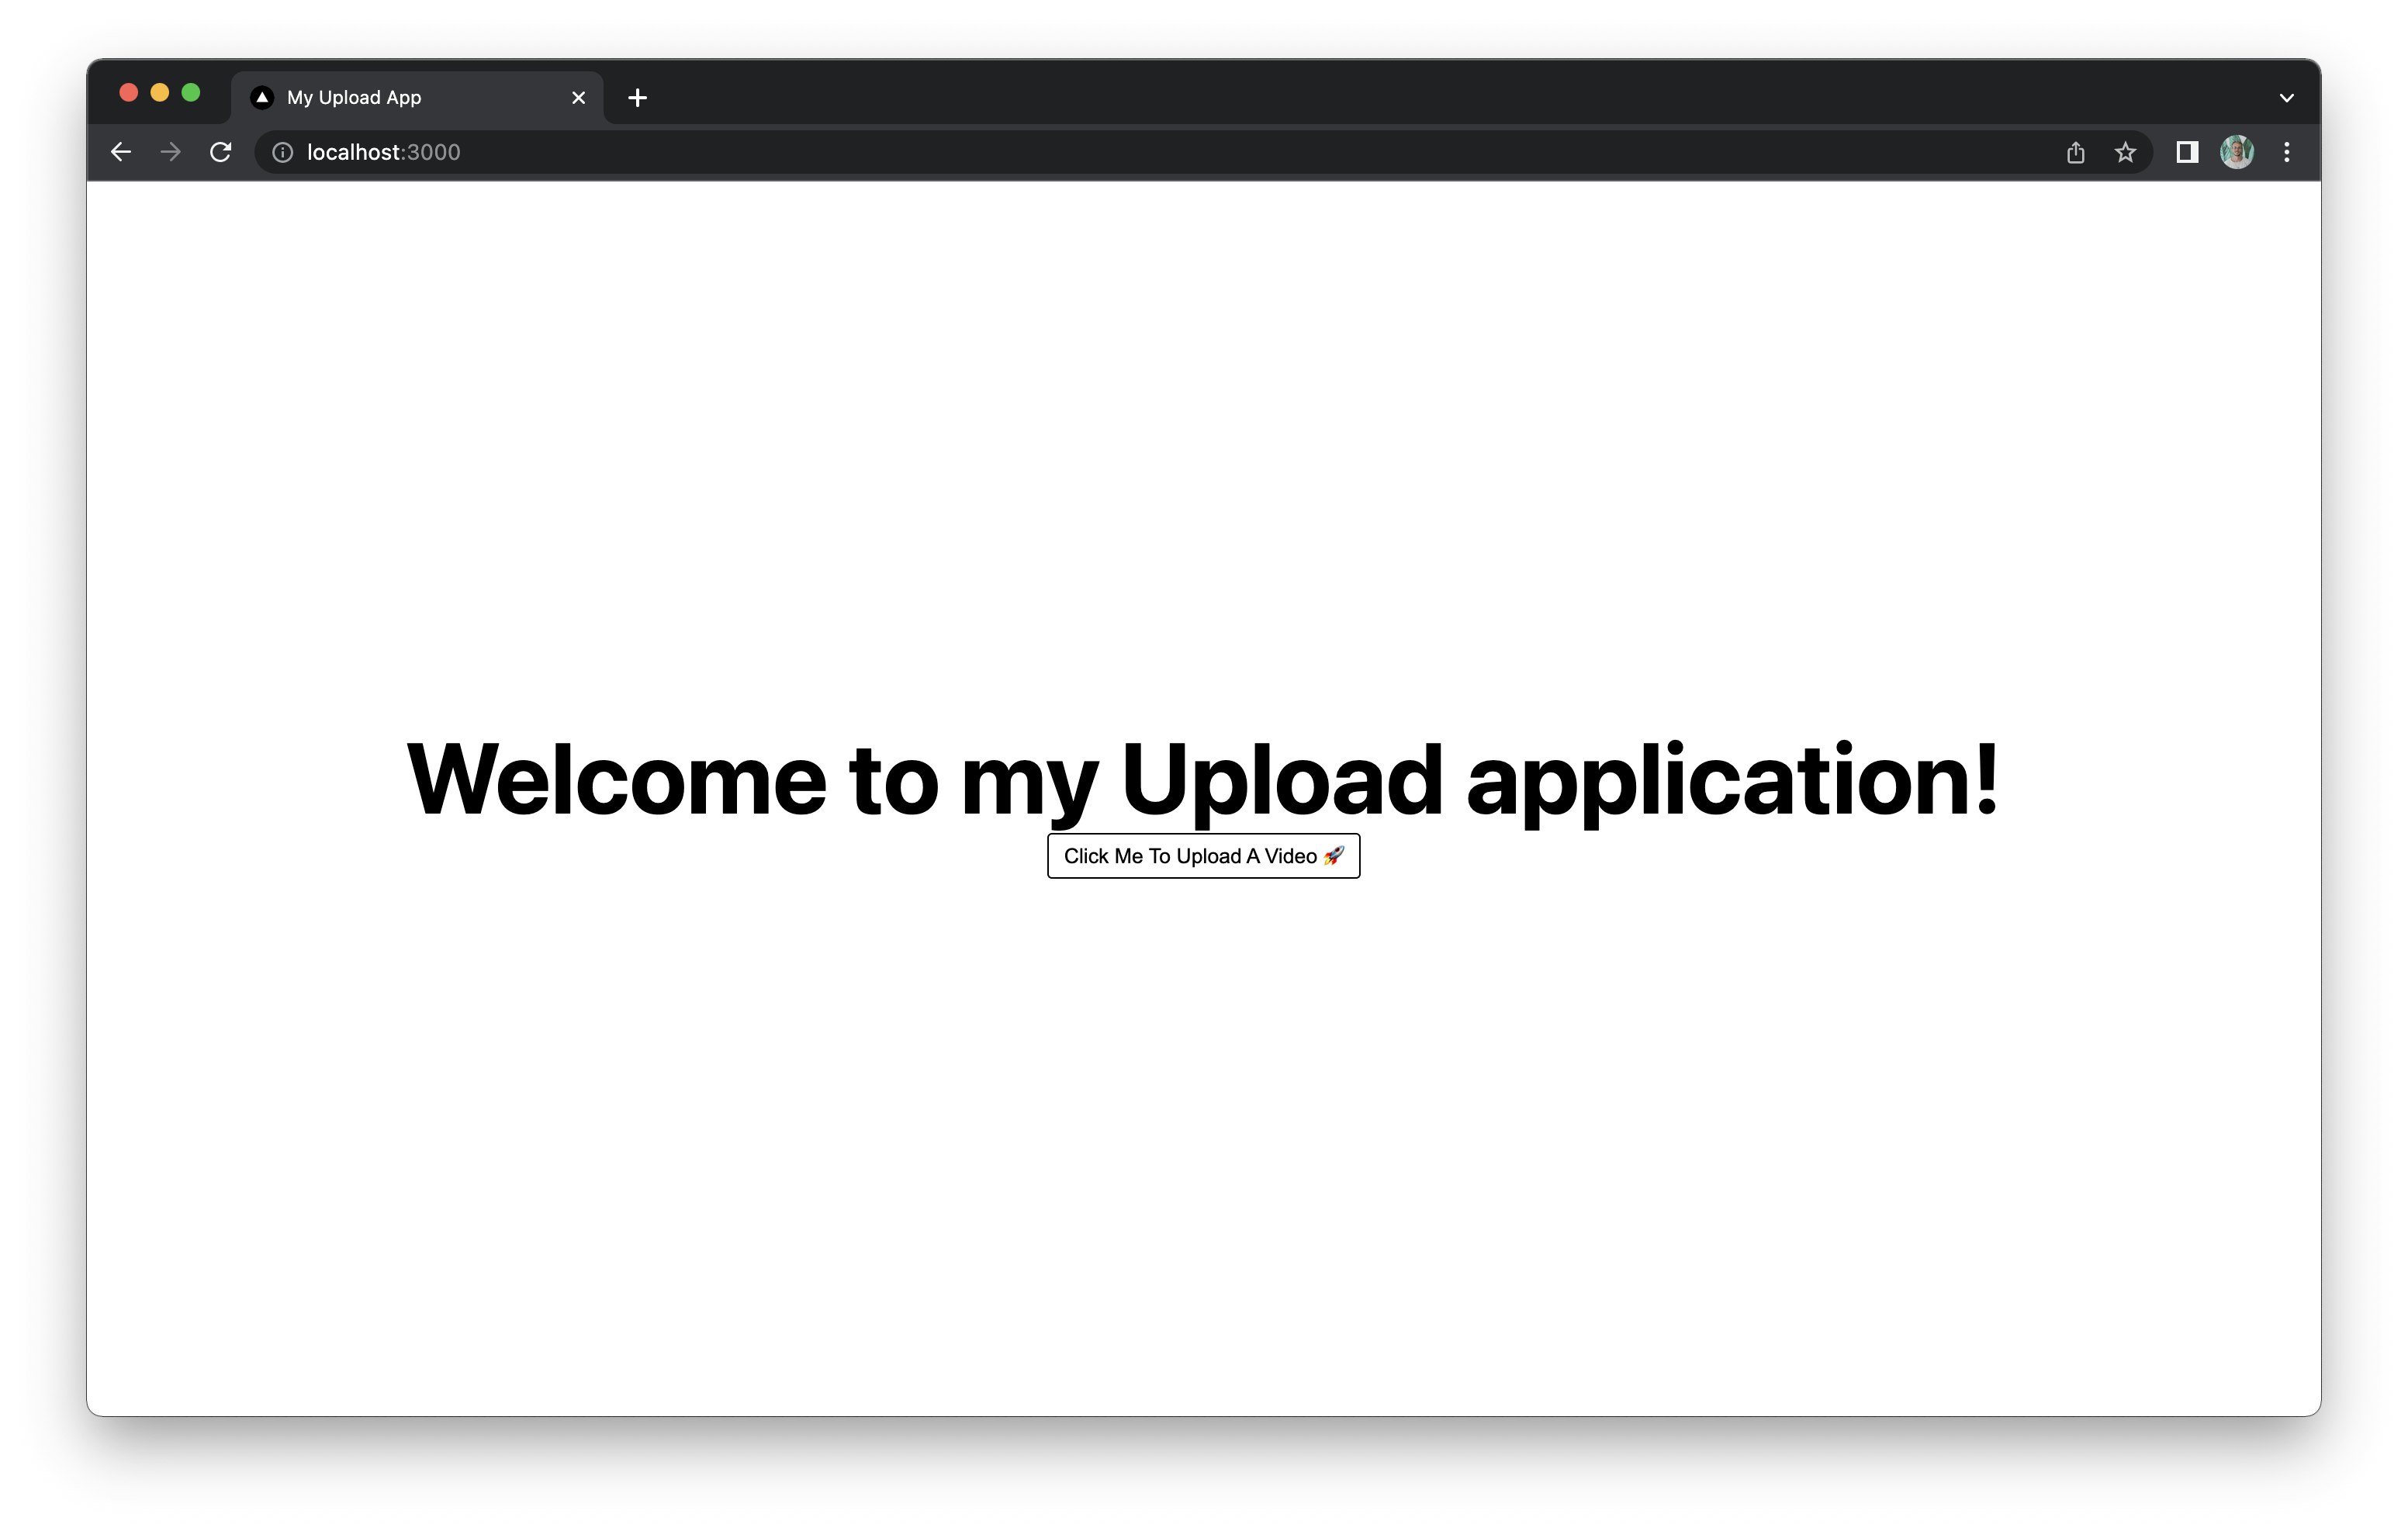 The upload application